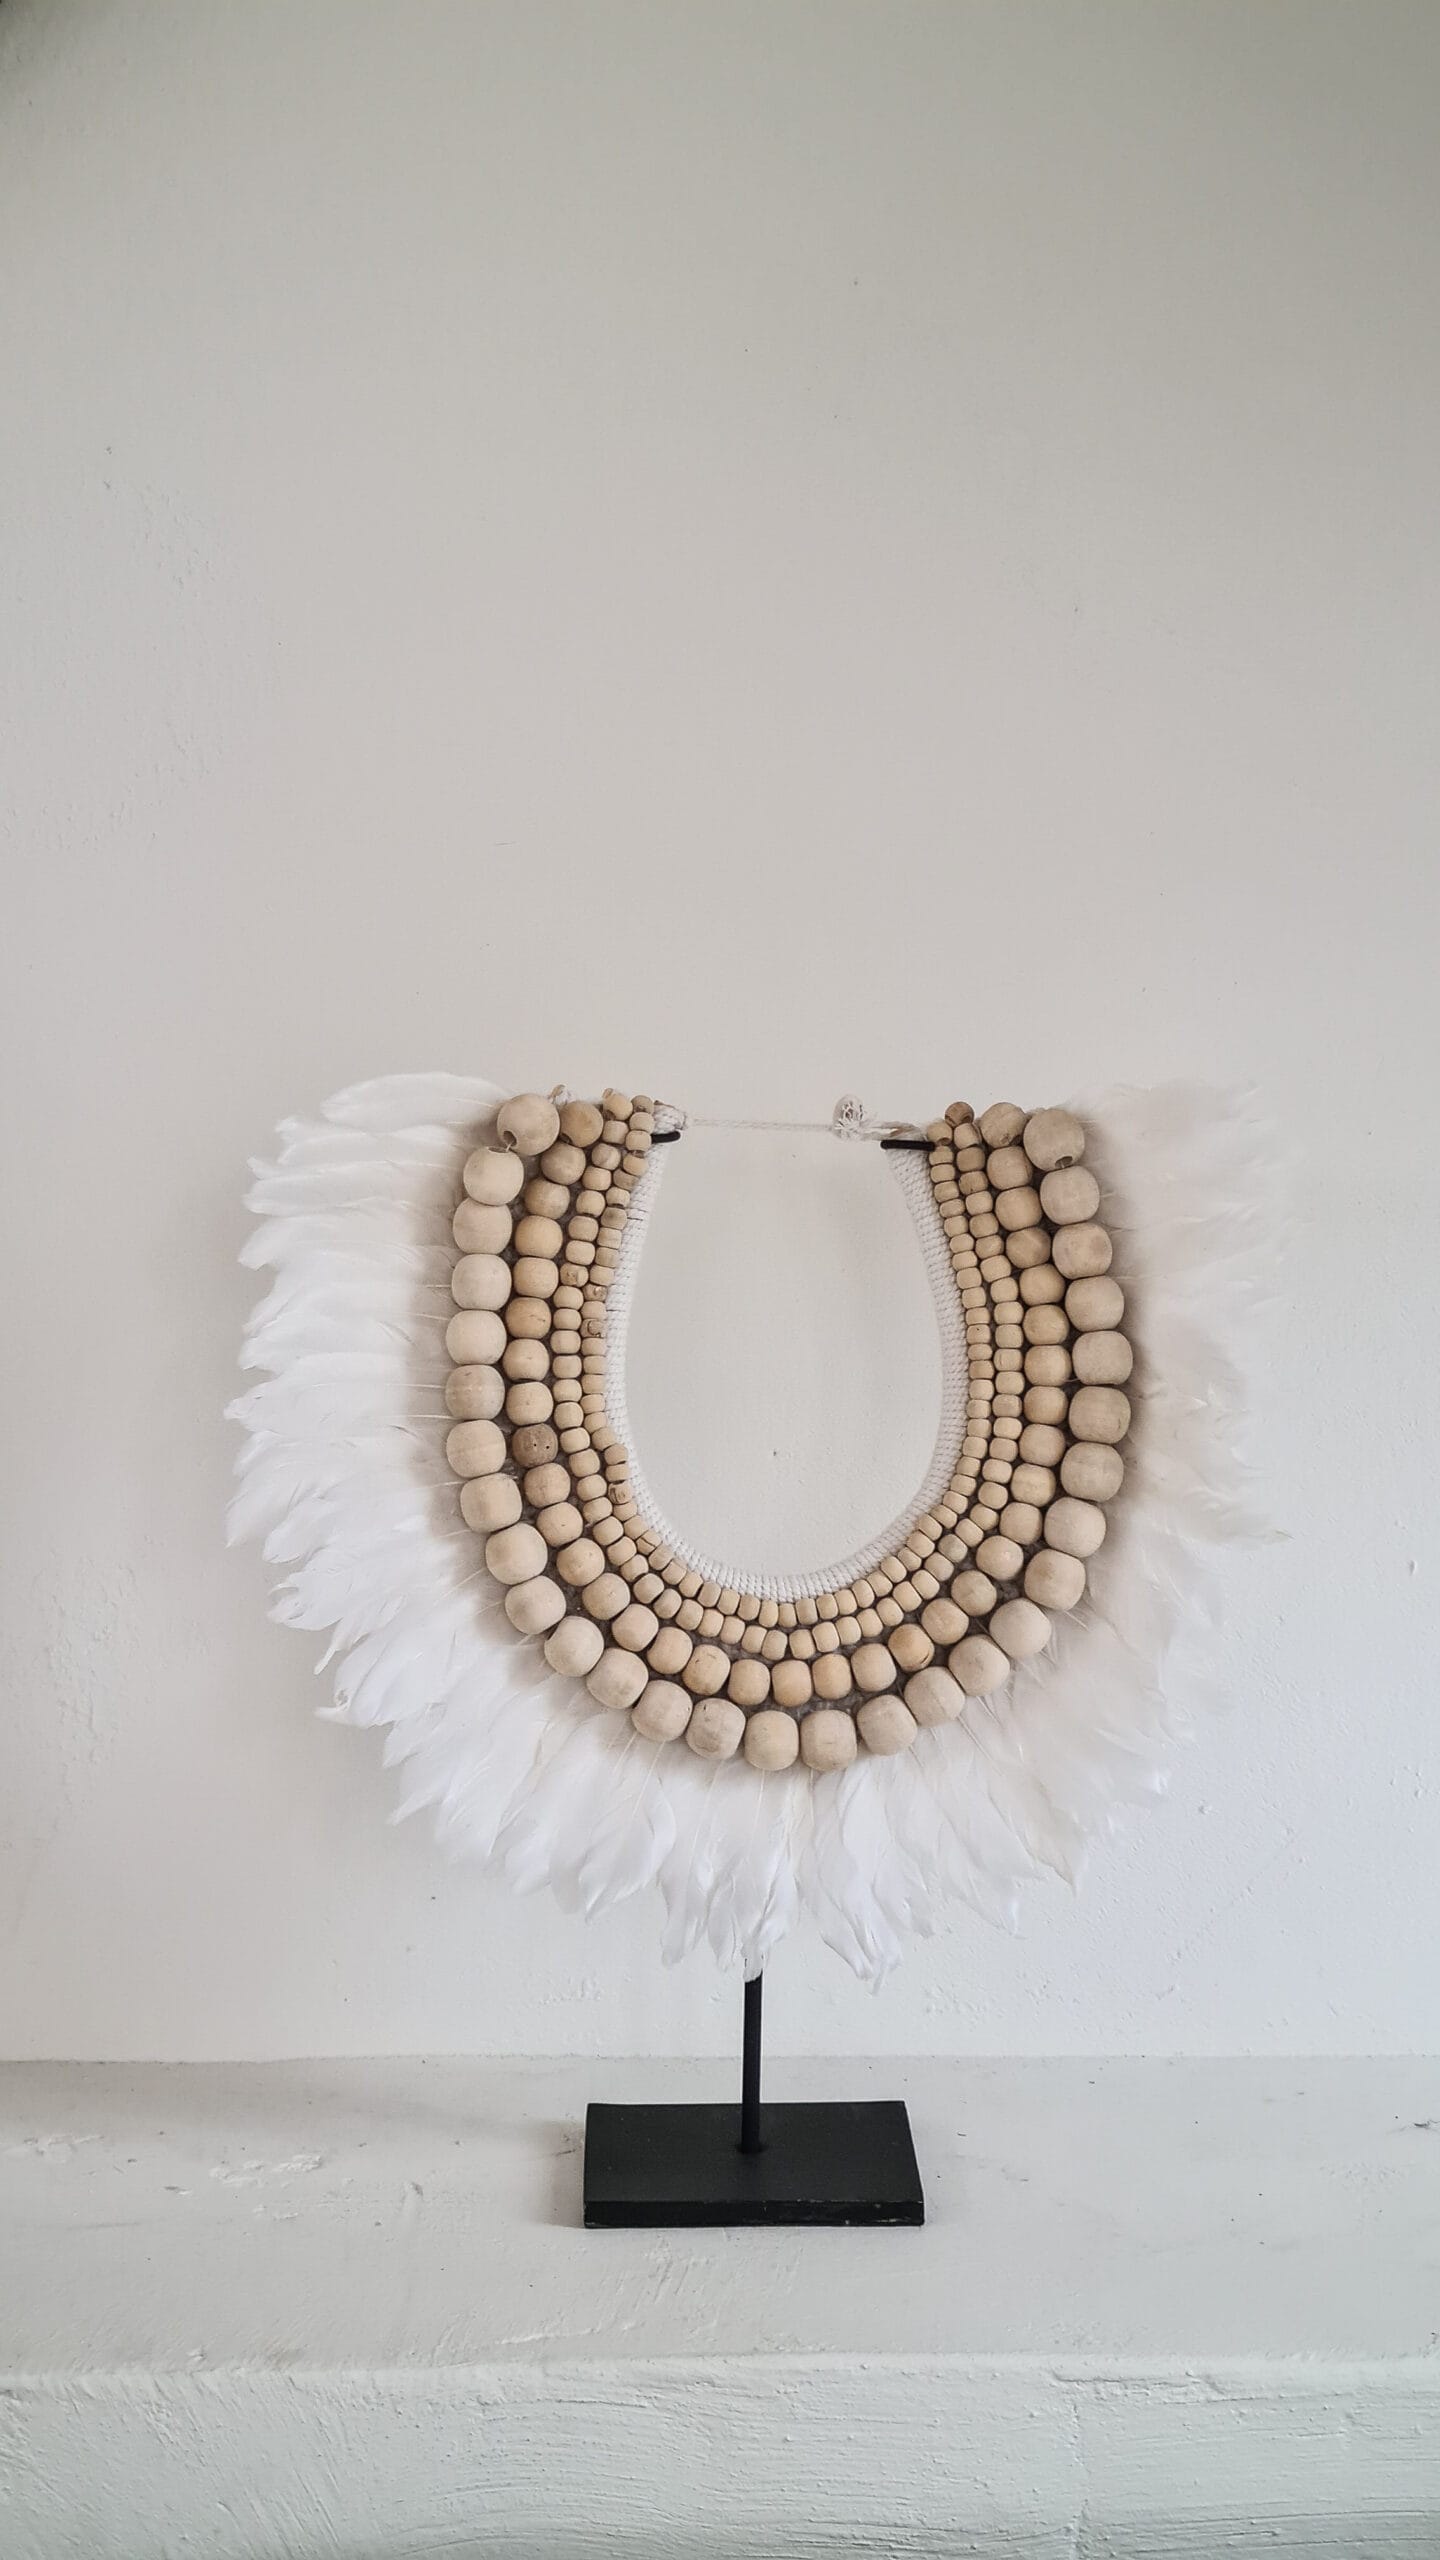 Arrecife Feather Necklace - Handcrafted Tribal Necklace